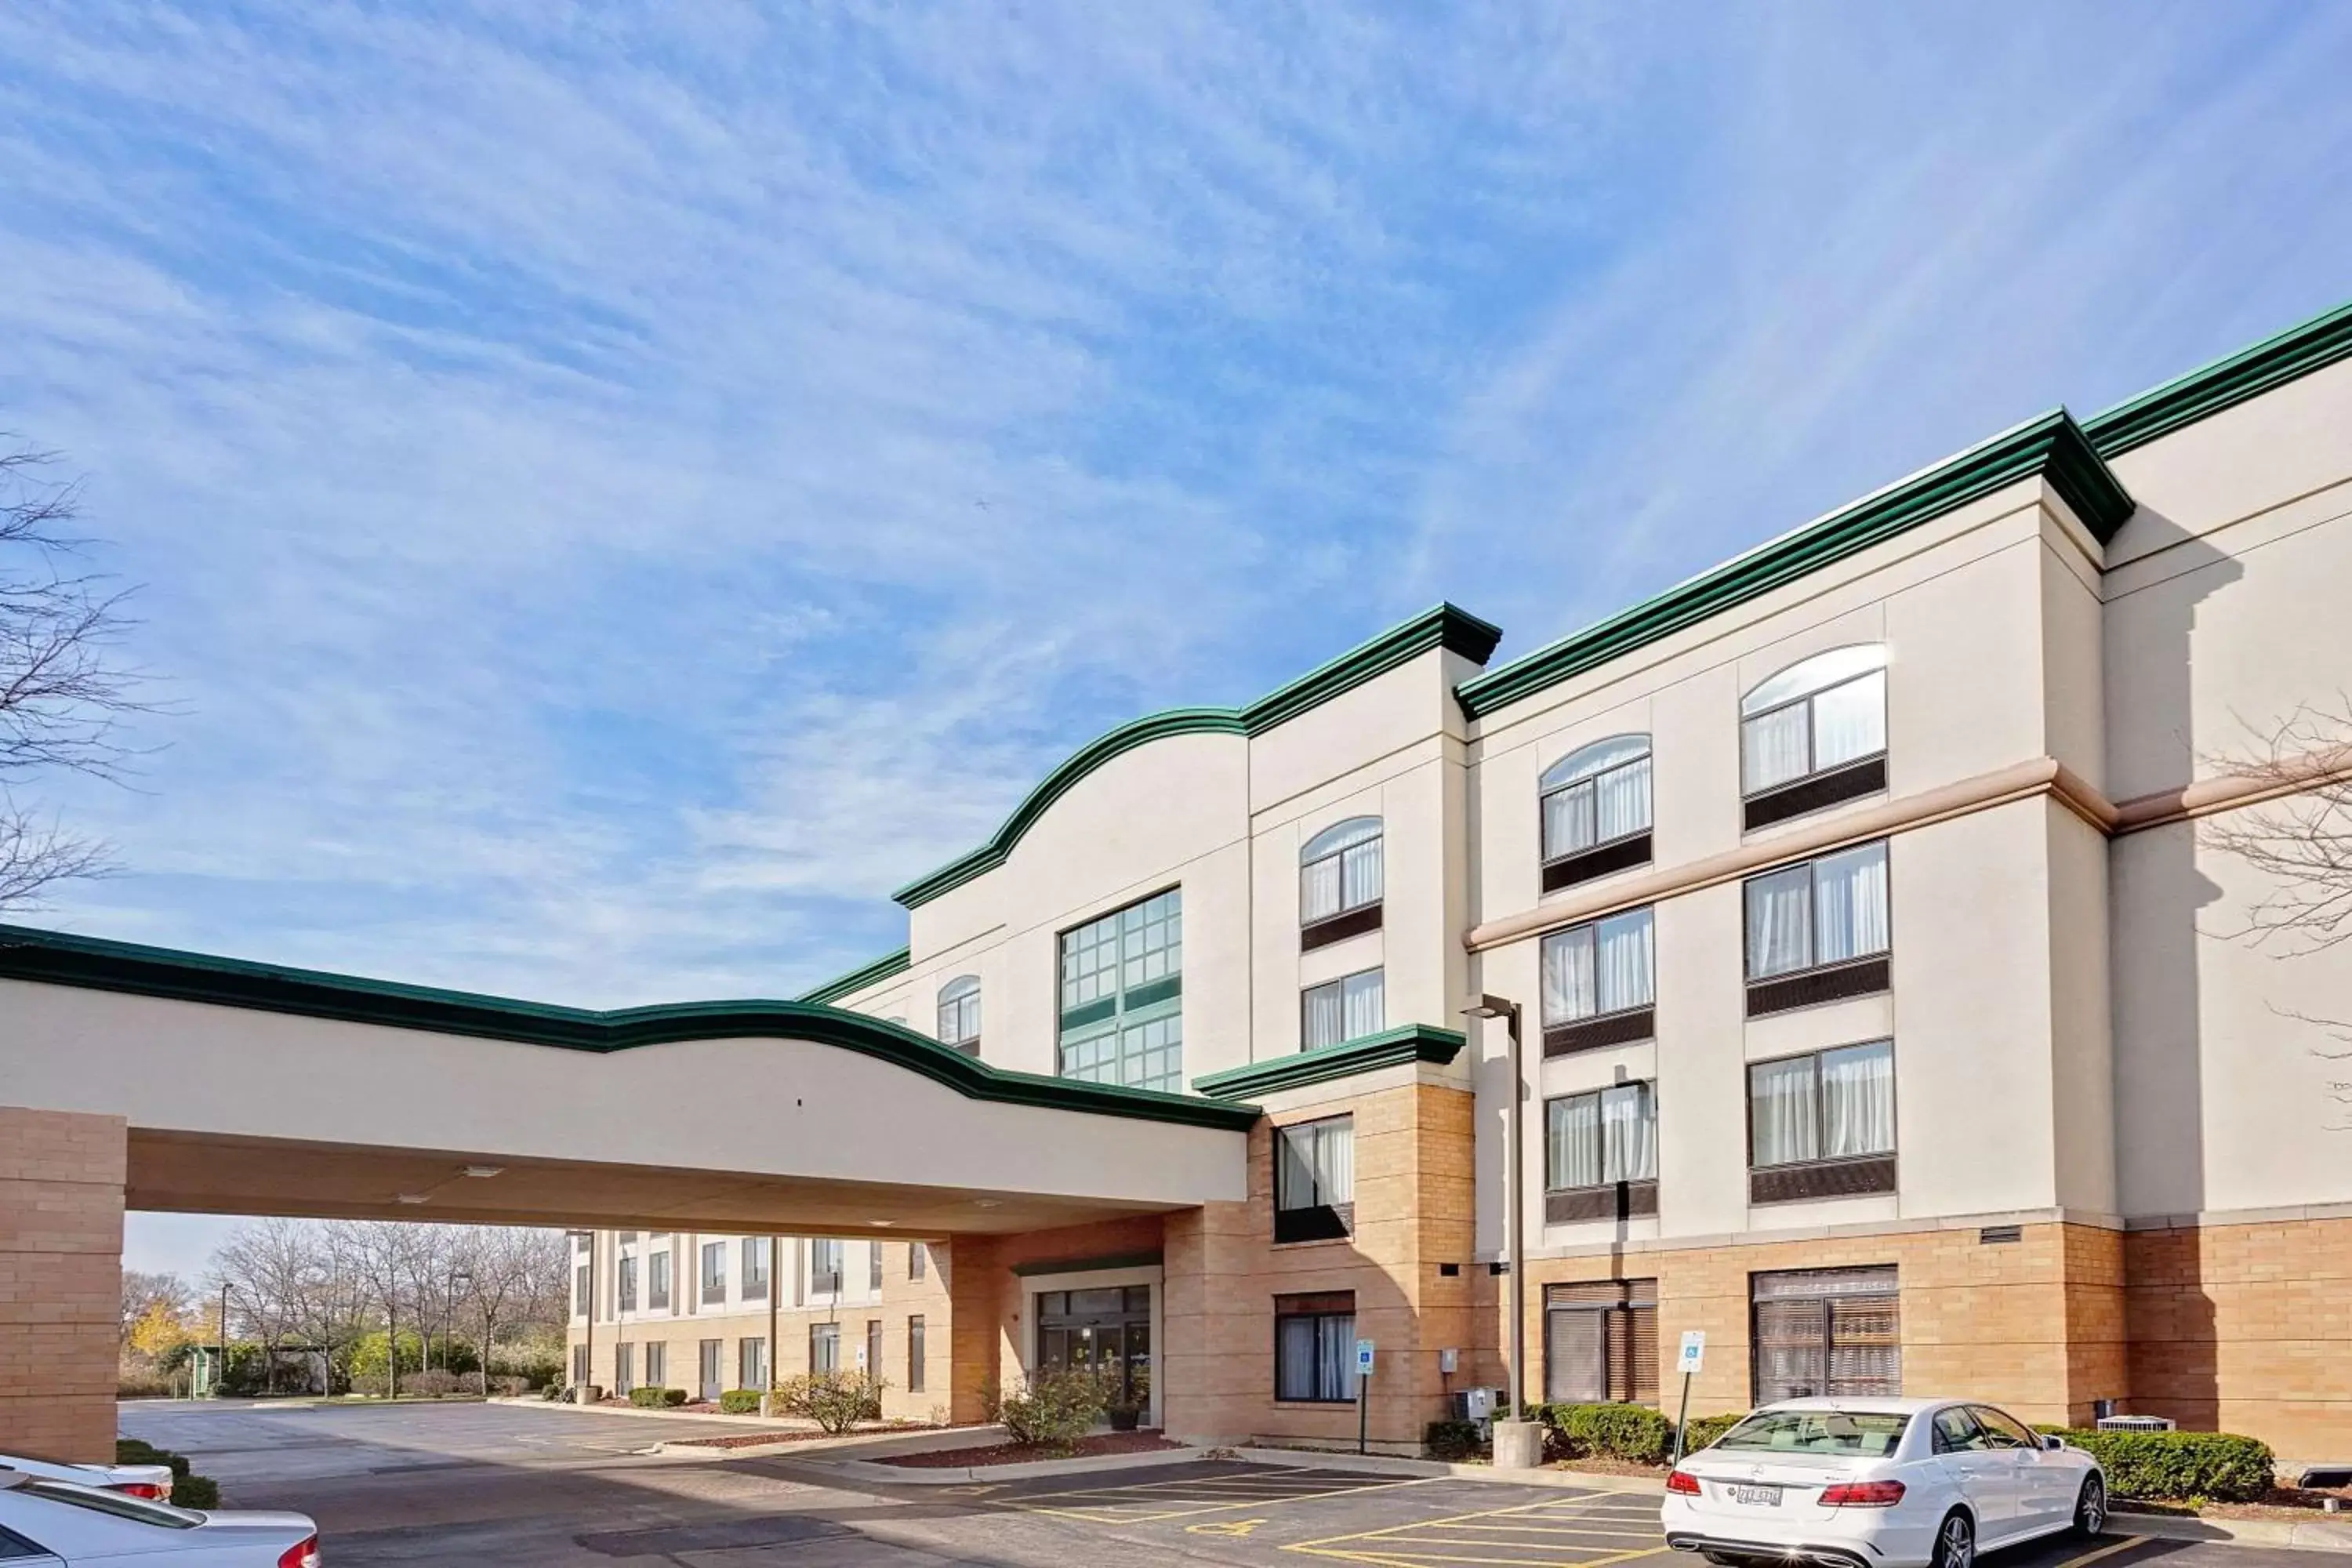 Property Building in Wingate by Wyndham - Arlington Heights